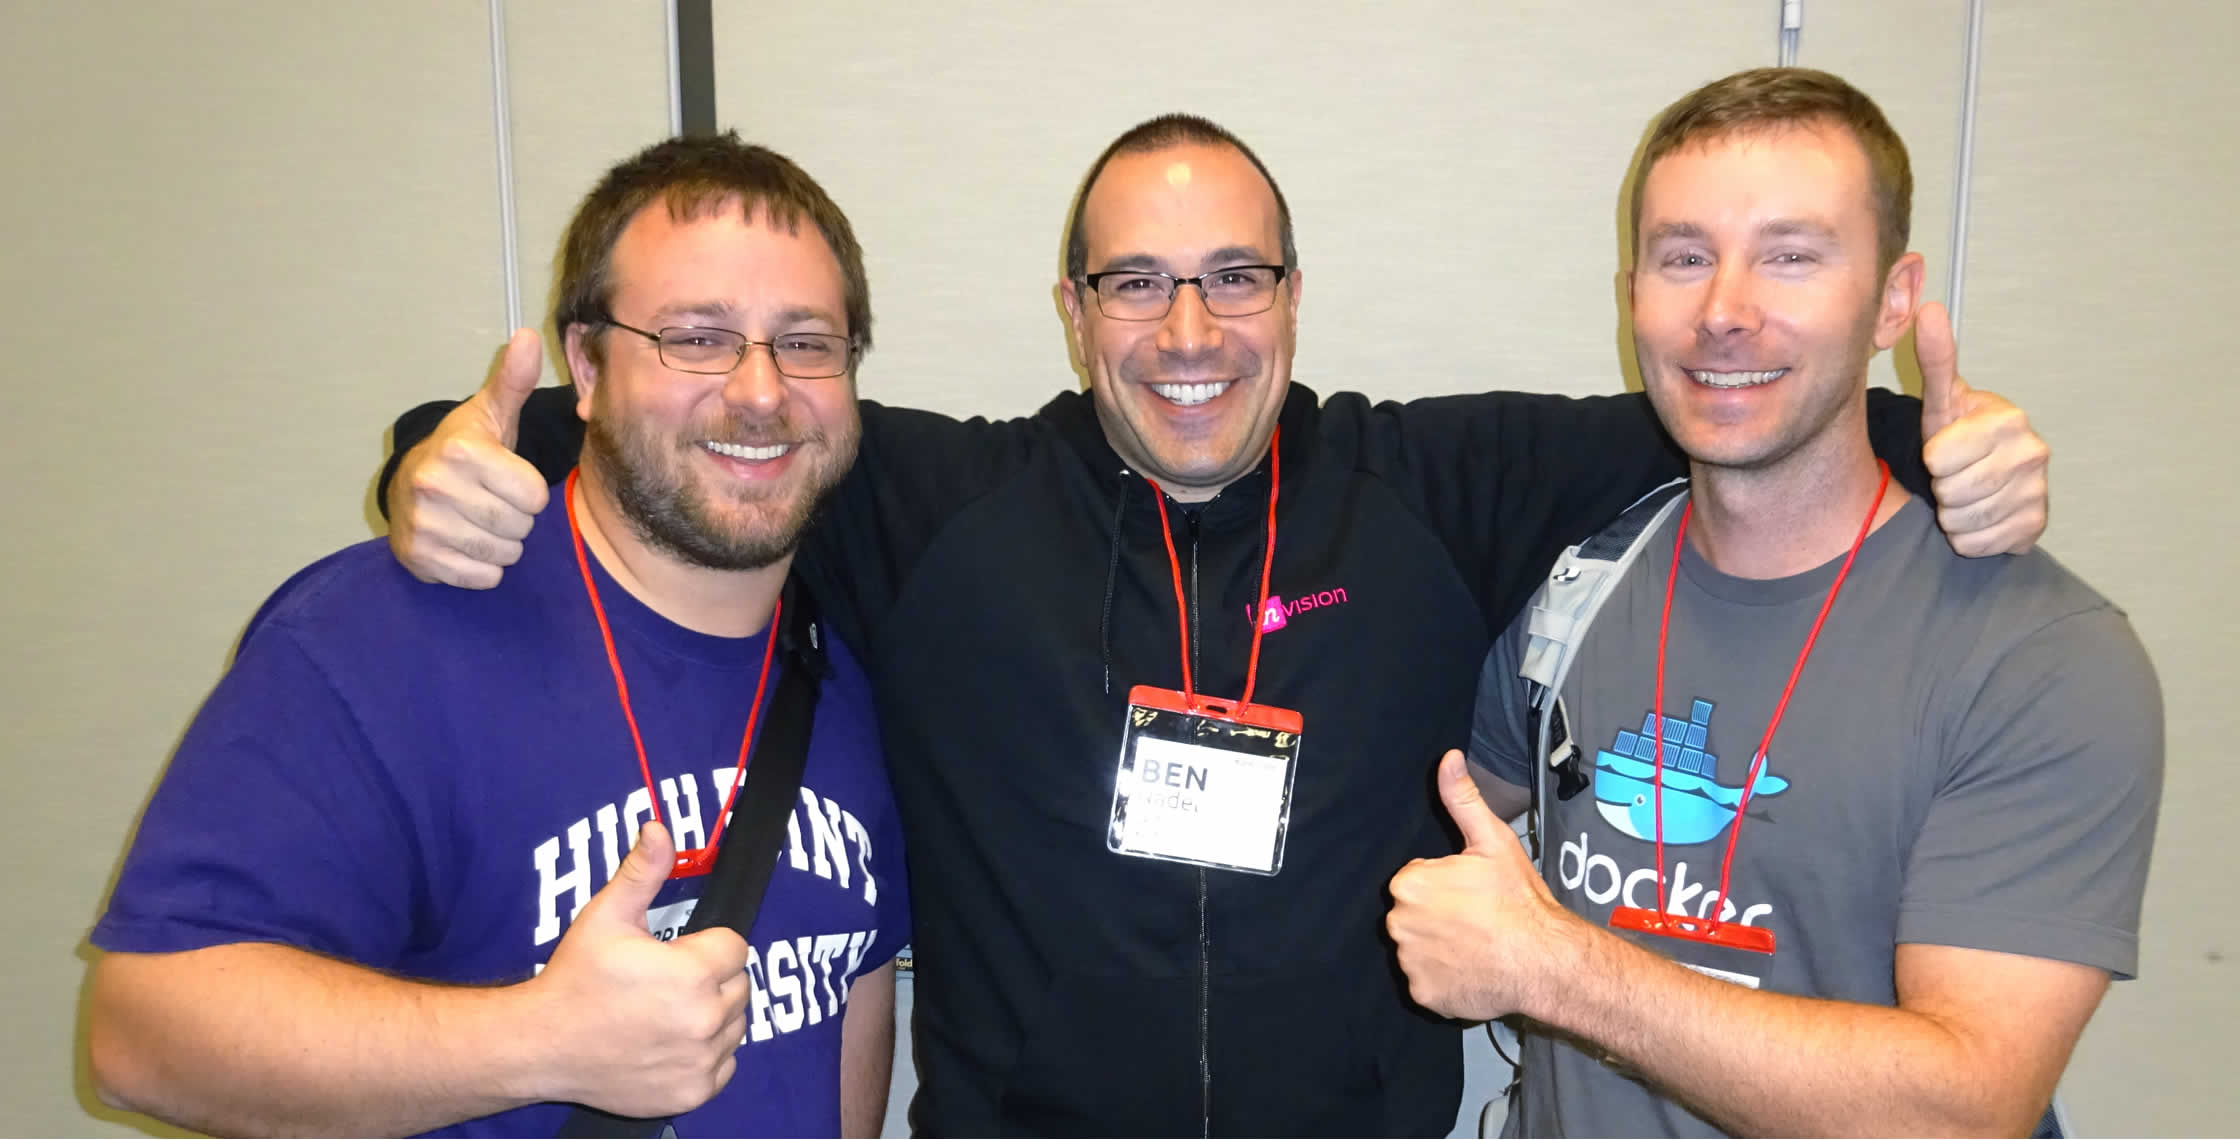 Ben Nadel at NCDevCon 2016 (Raleigh, NC) with: George Garrett Neisler and Chris Bestall